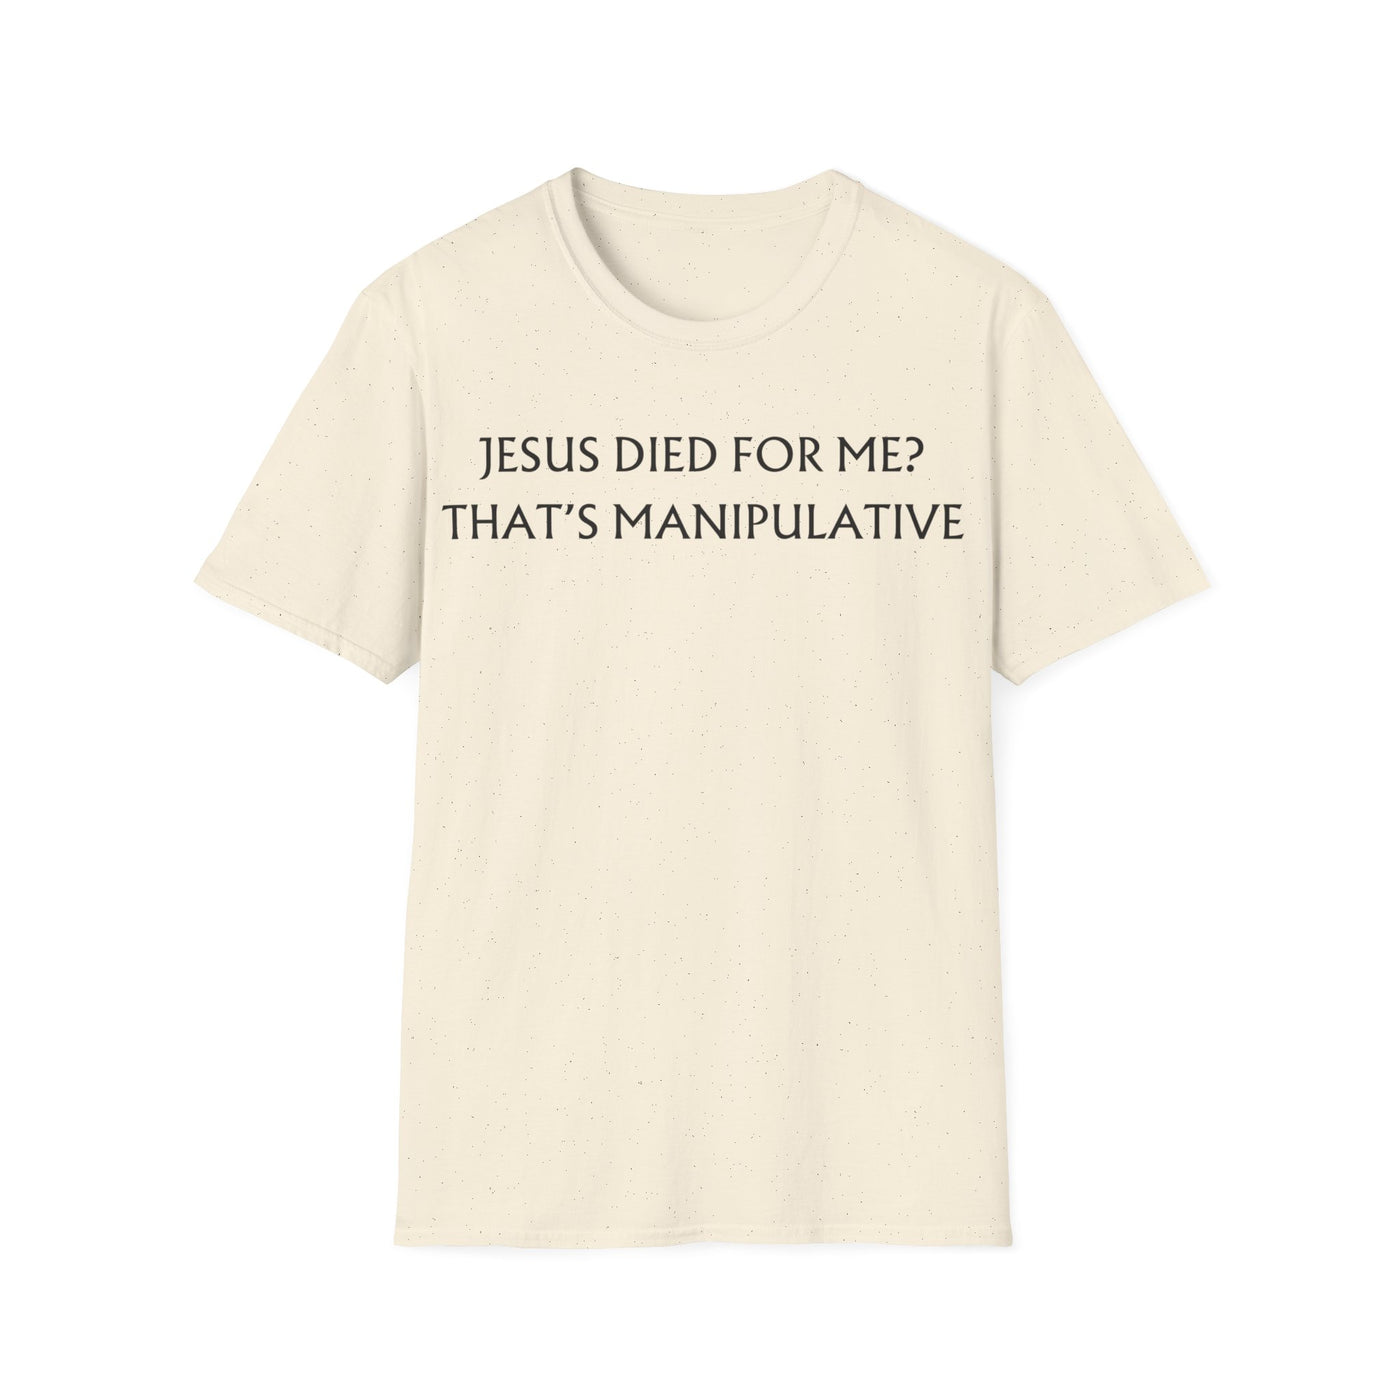 Jesus Died For Me? That's Manipulative